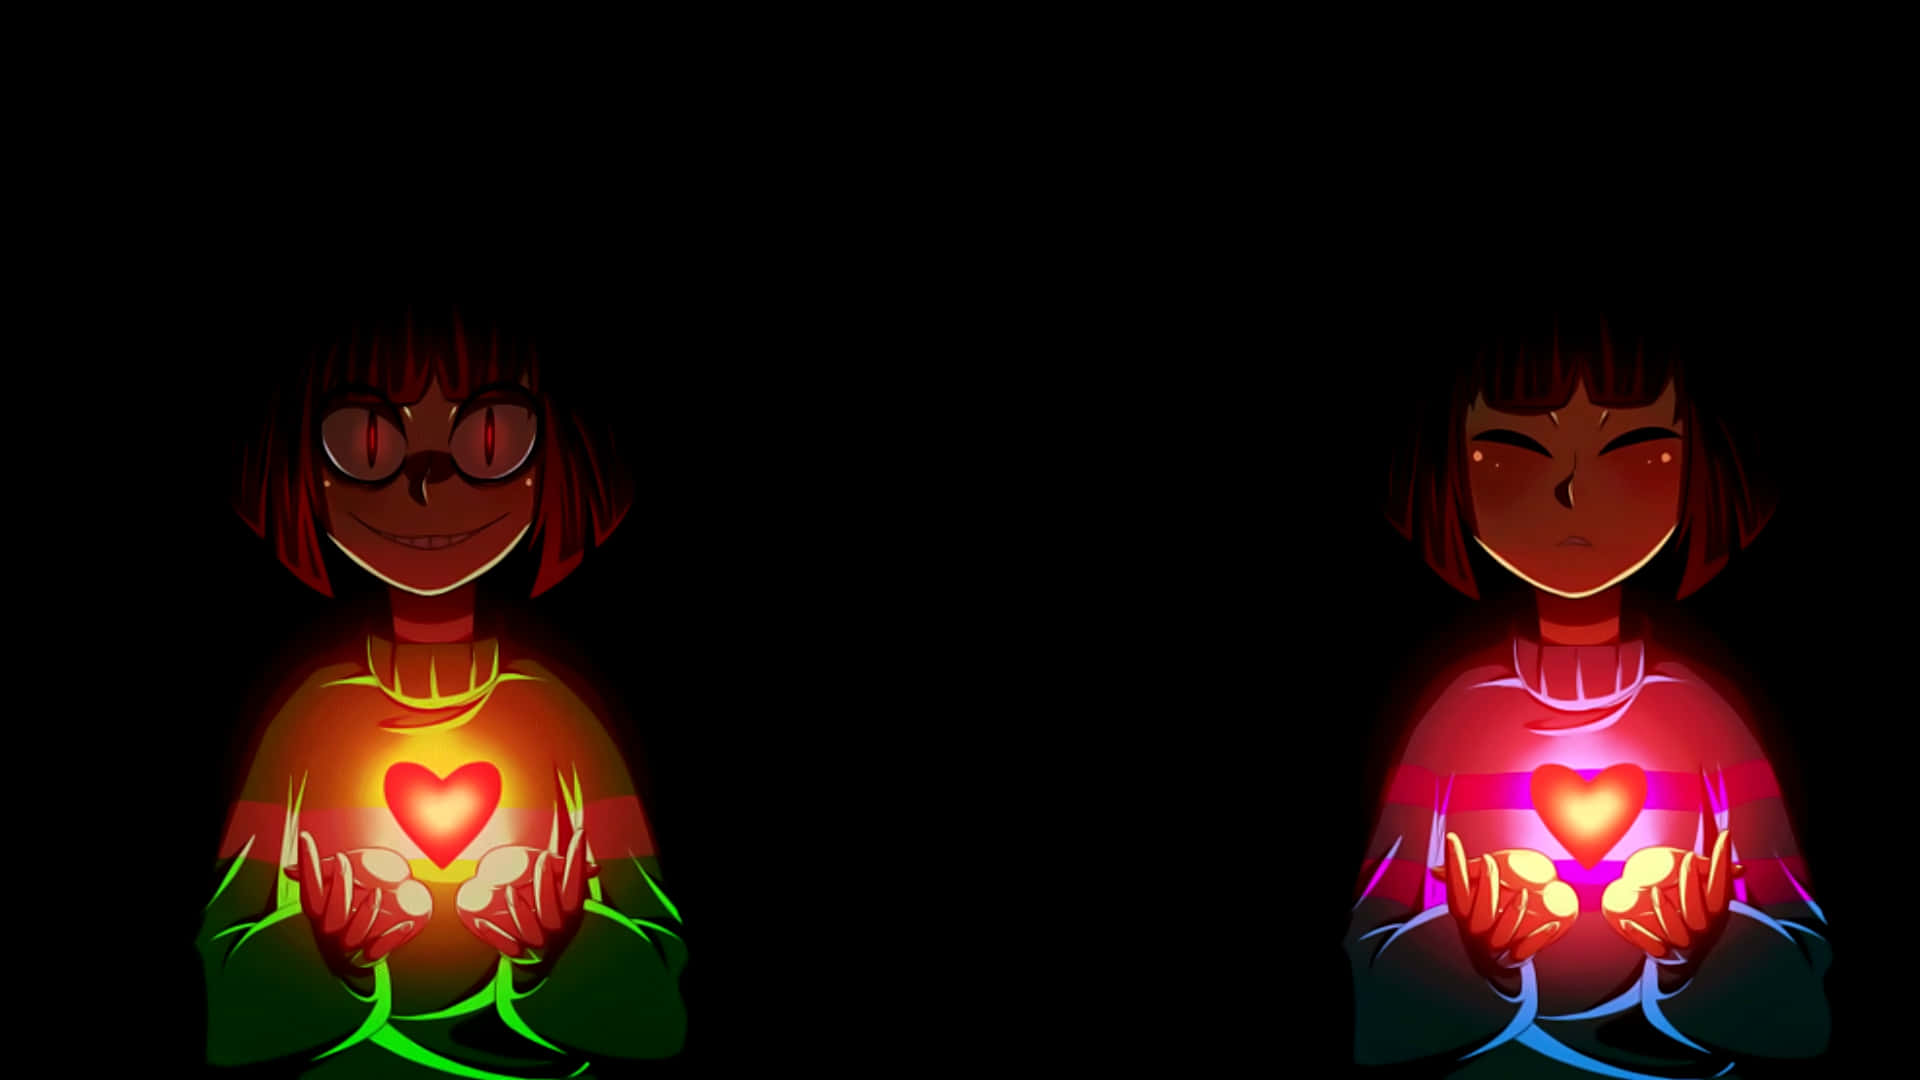 "Adventures Await: Frisk is Ready to Take On the Journey." Wallpaper